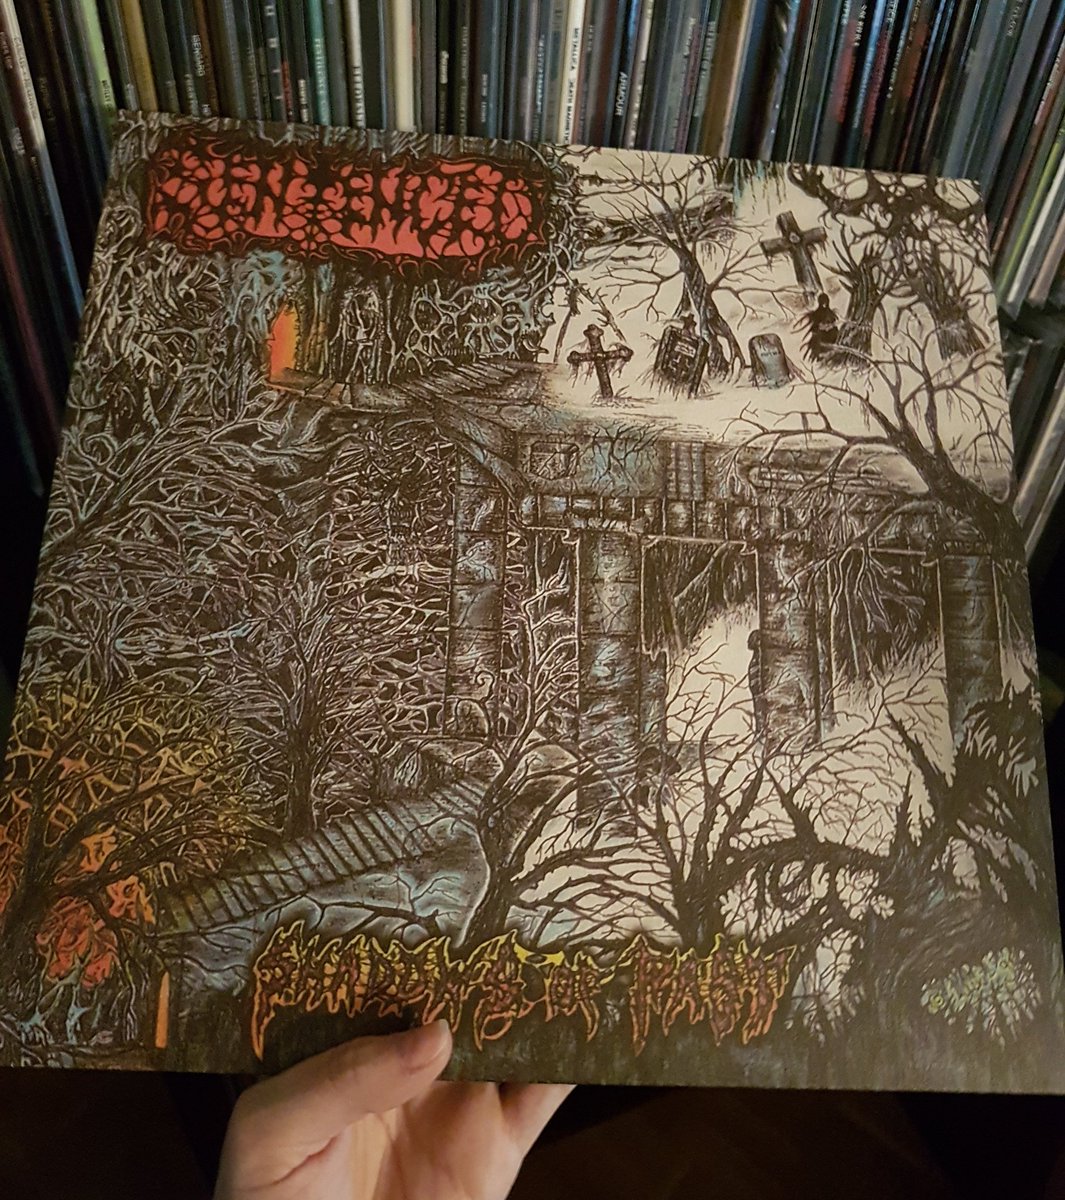 Now spinning SENTENCED Shadows of the Past! Sad, gloomy, aggressive, & filled with melancholy. Finland's SENTENCED first '92 full length release, is a definite recommended listen for fans of Death Metal. #sentenced #shadowsofthepast #deathmetal #finnishdeathmetal #themetalheadbox